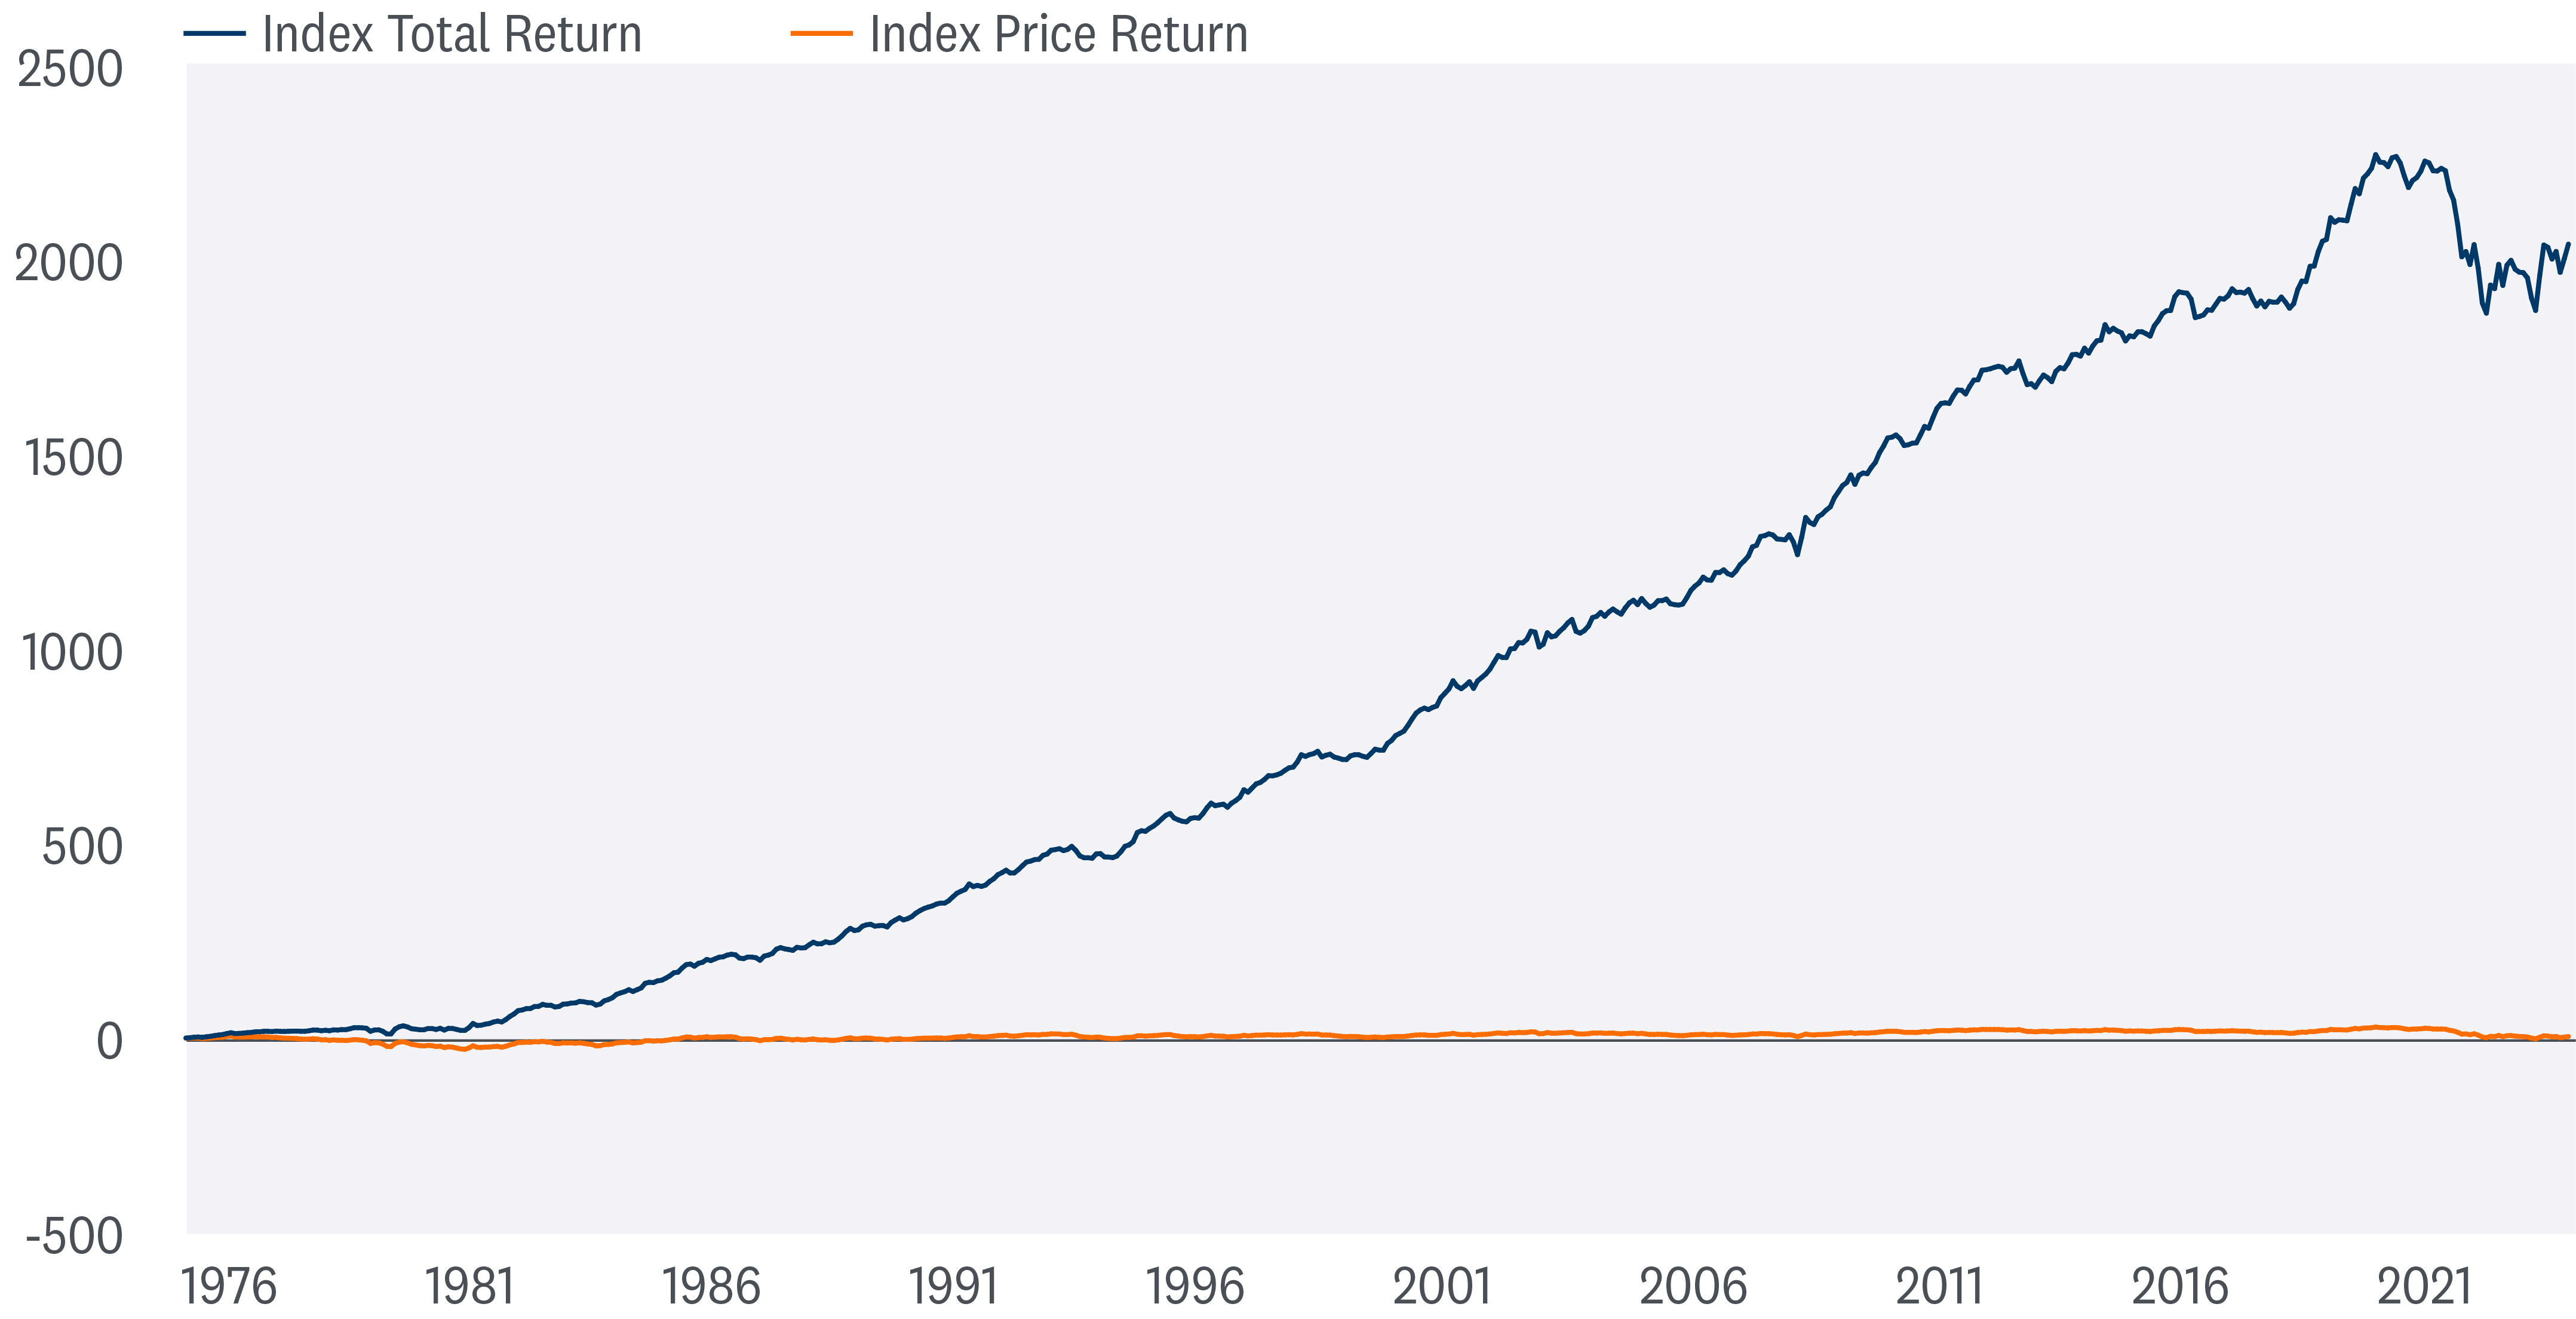 This chart shows the Bloomberg Aggregate Bond Index total return and index price return from 1976 to 2021.